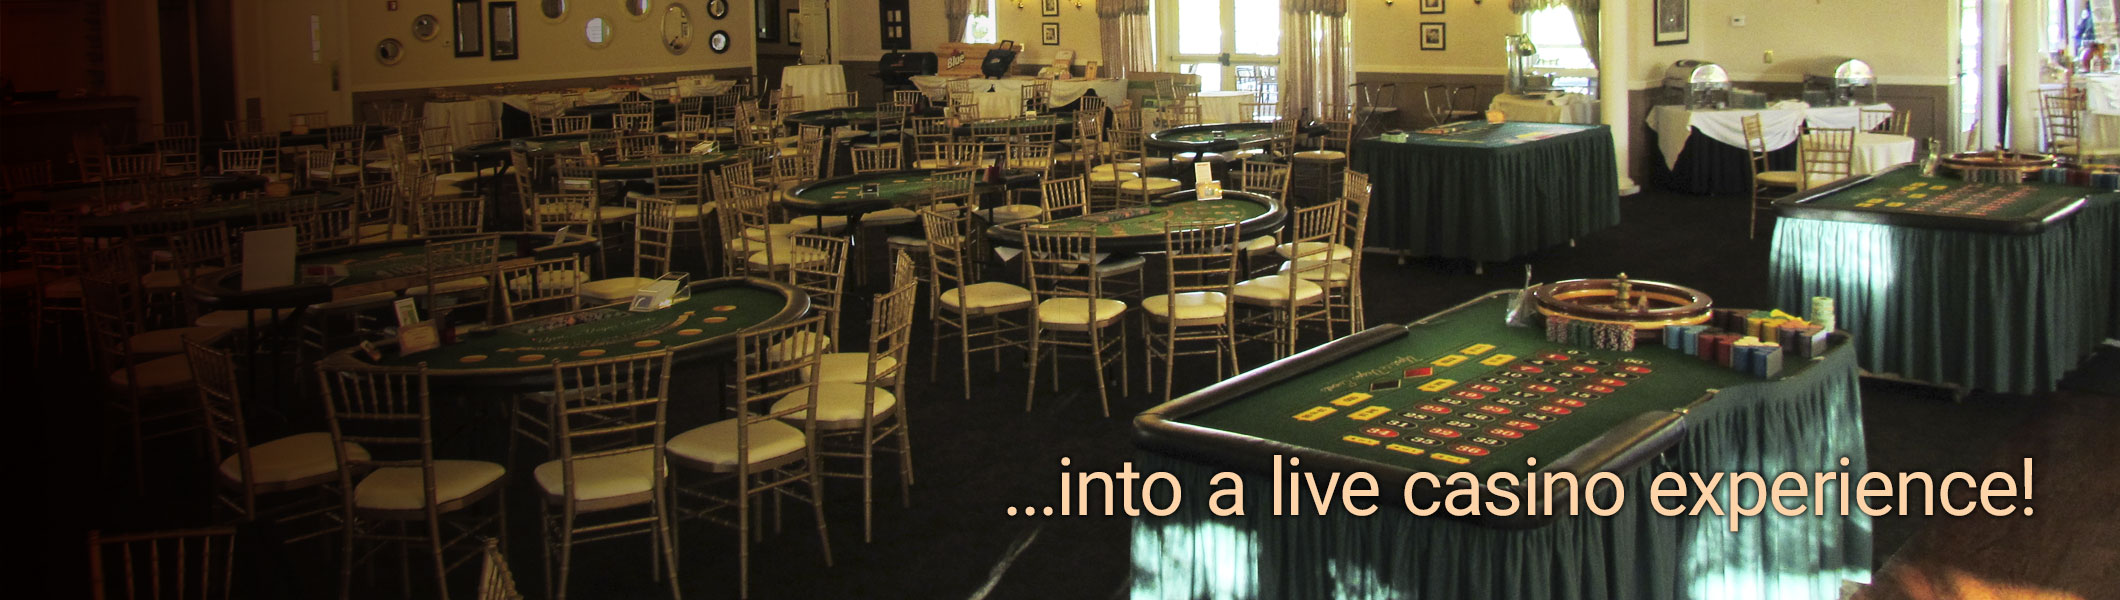 Experience a Live Casino